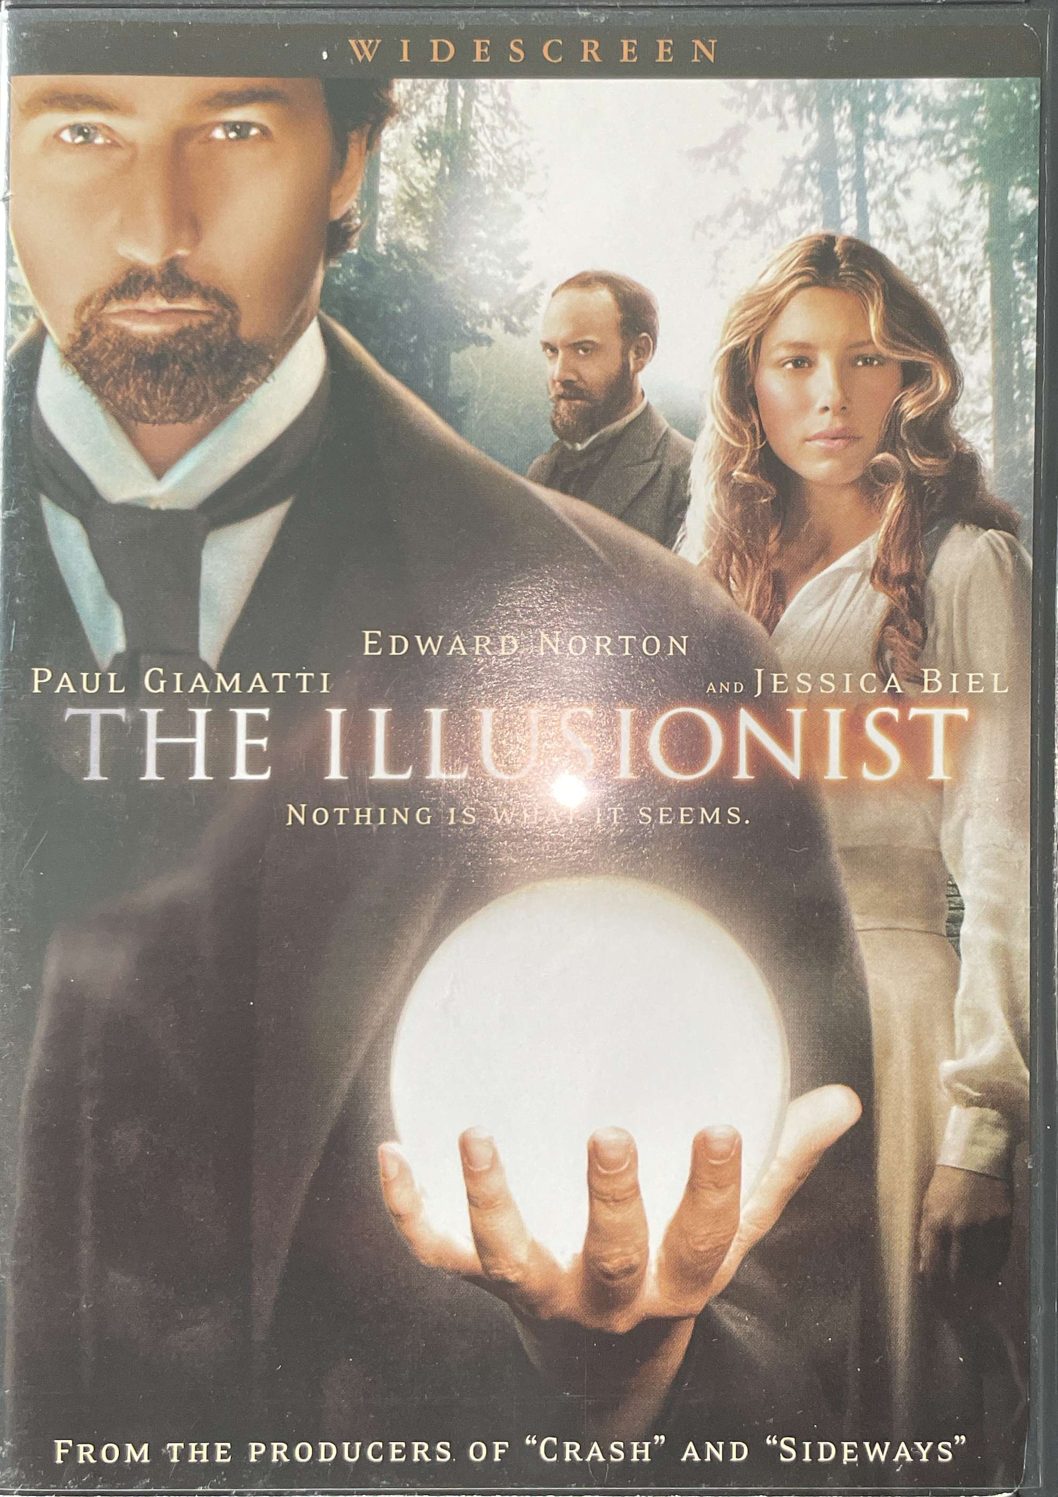 MOVIE REVIEW: The Illusionist